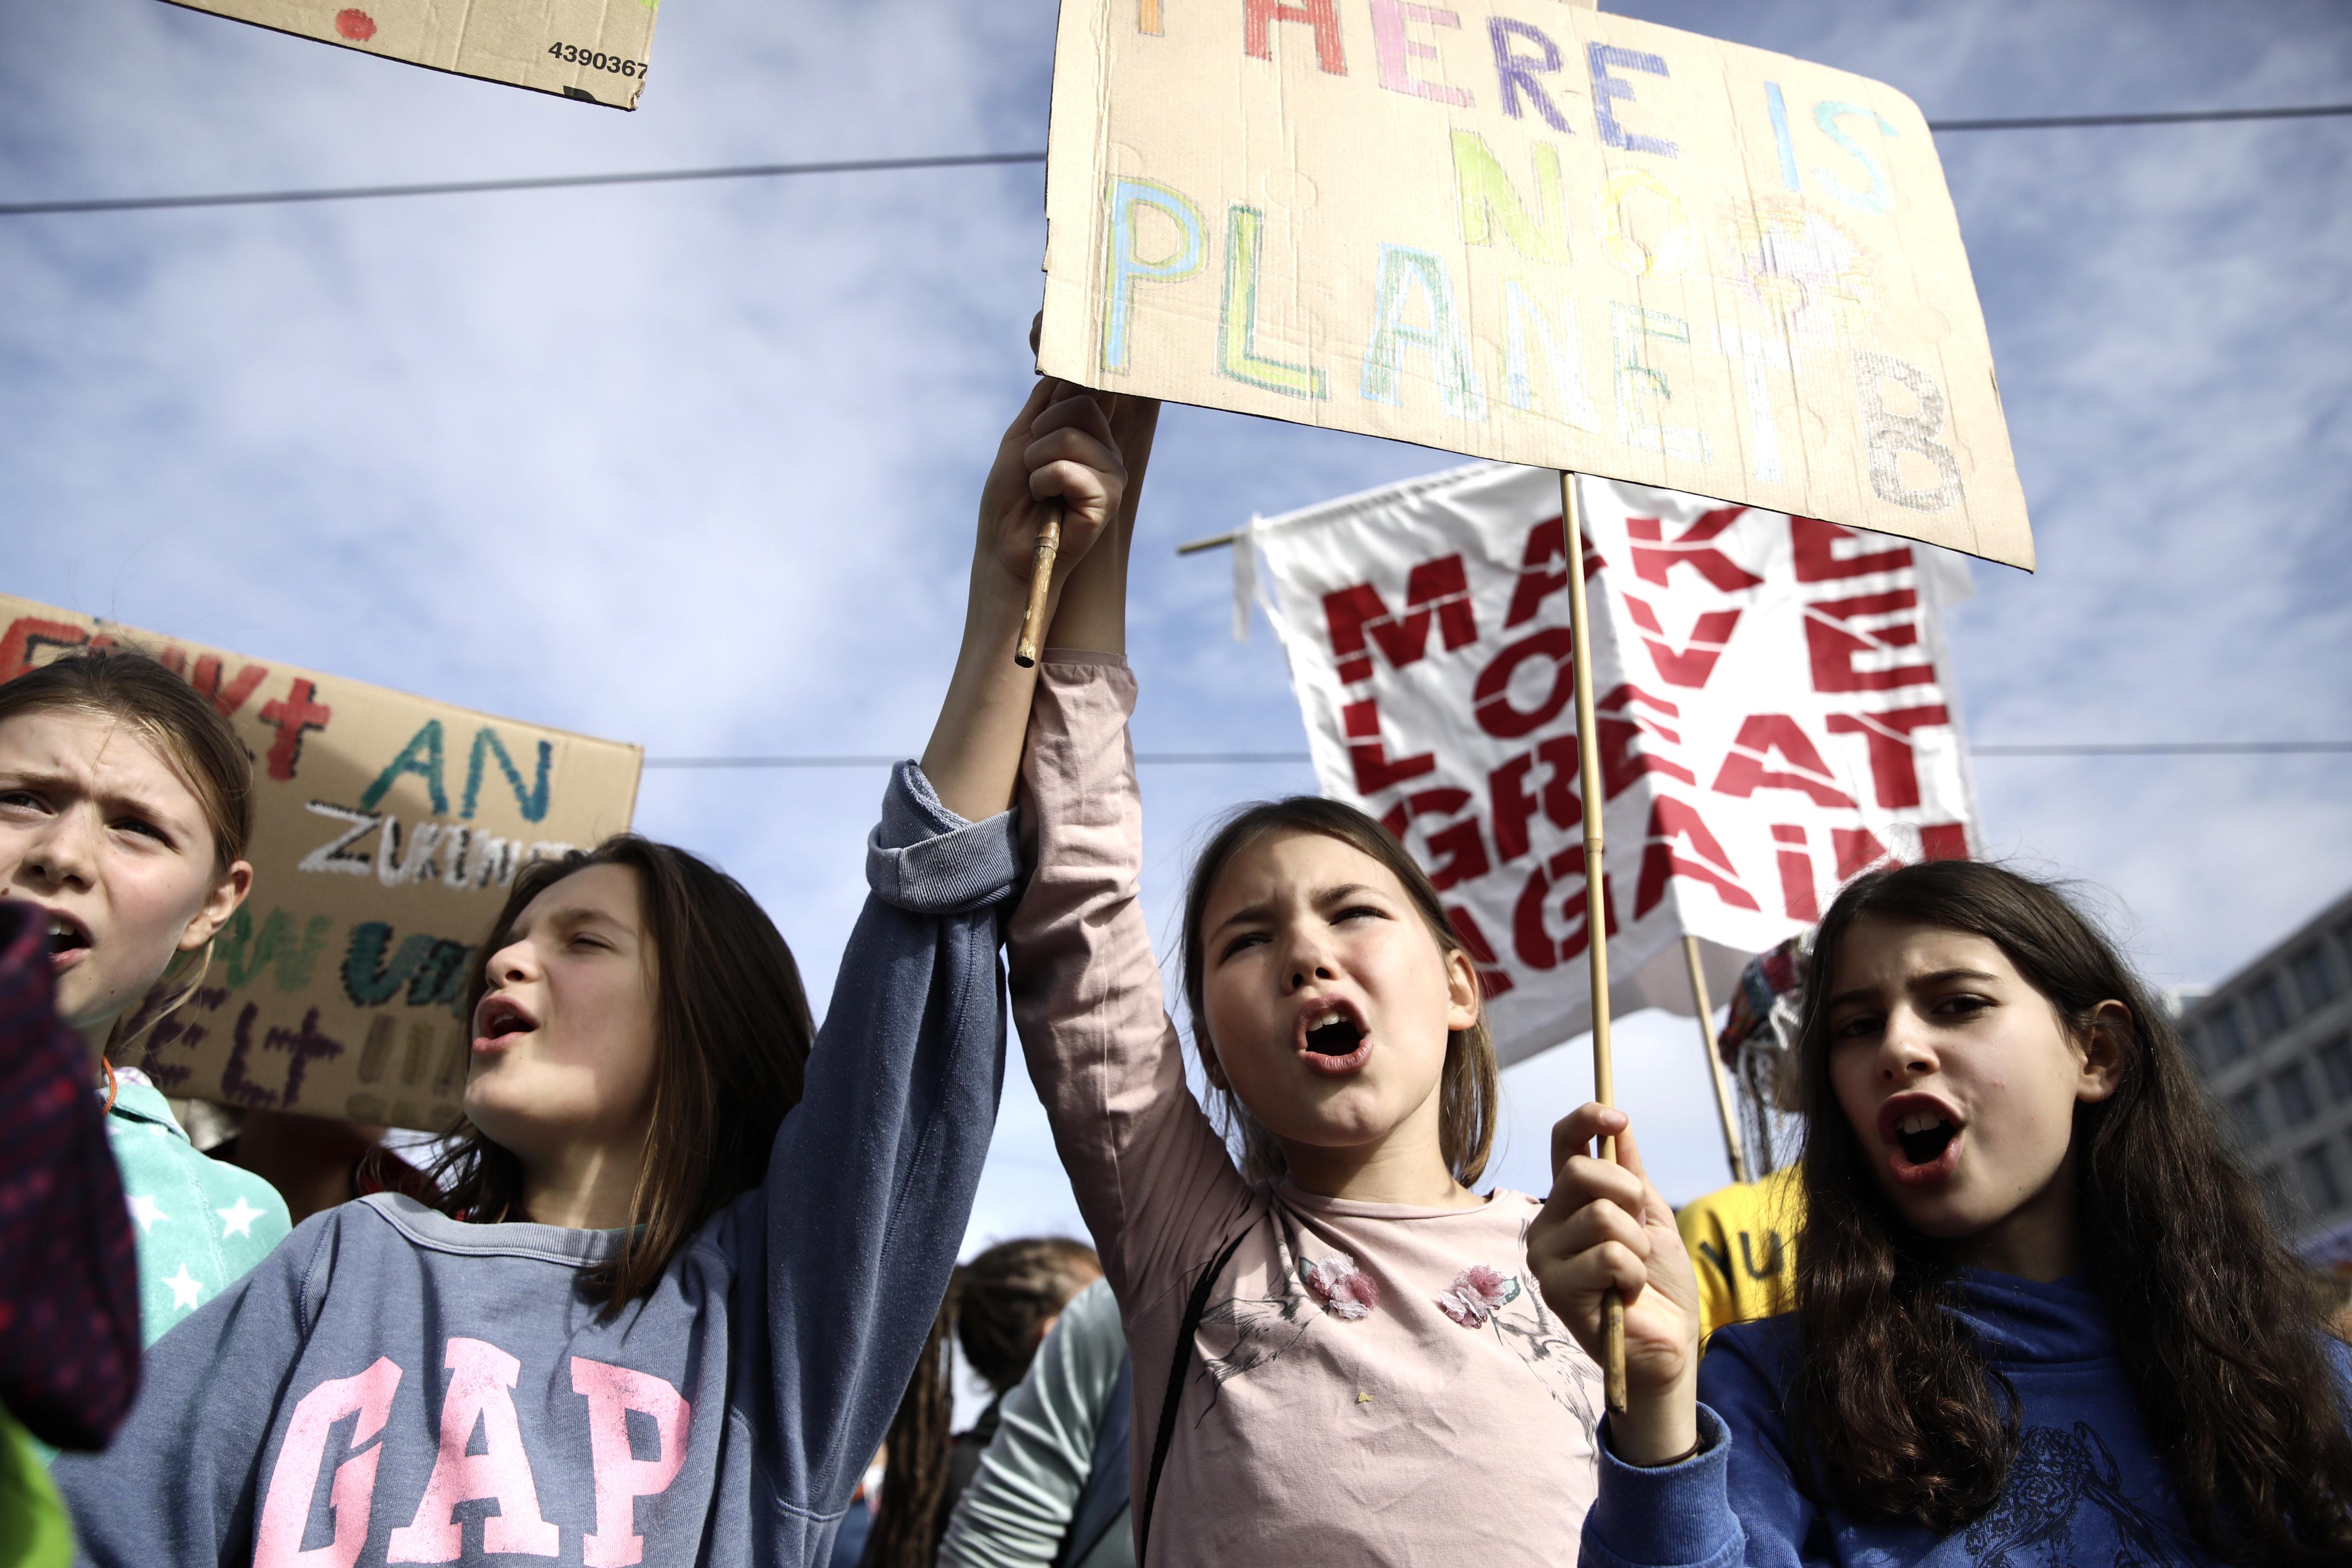 A group of girls chant and hold up signs.